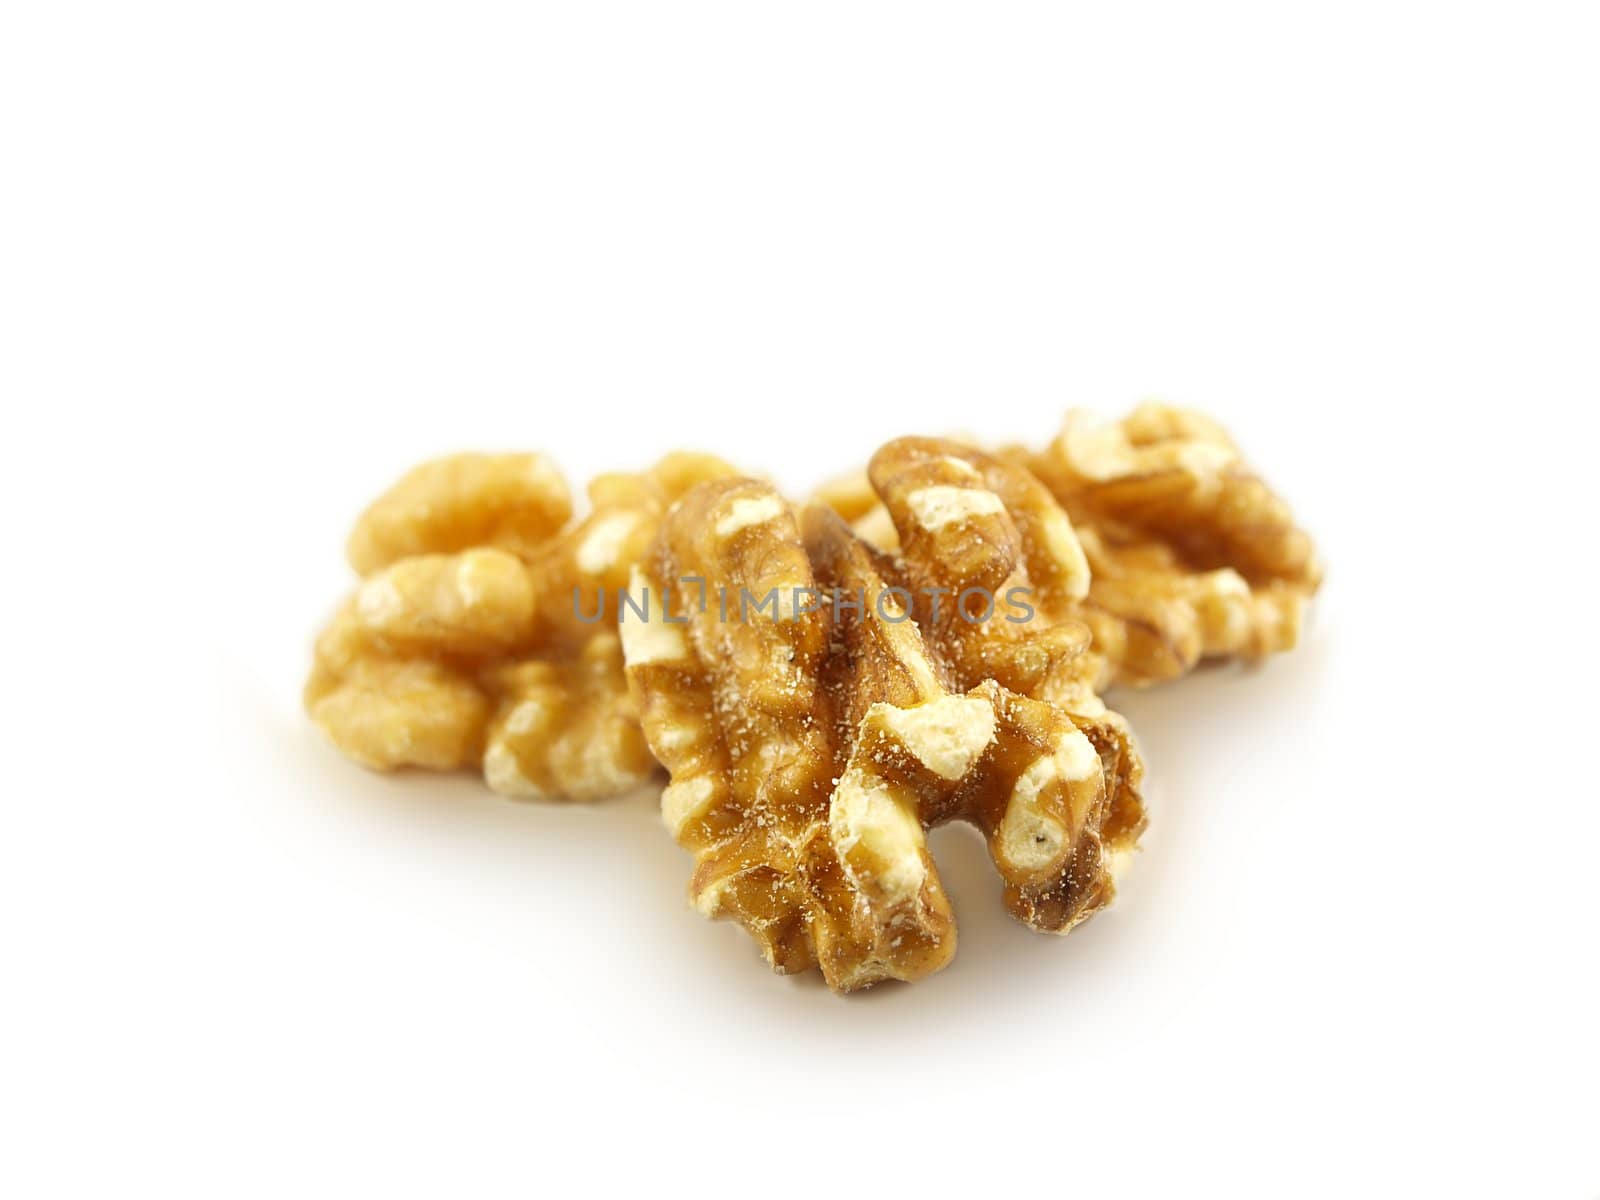 Walnuts in a pile isolated towards white background